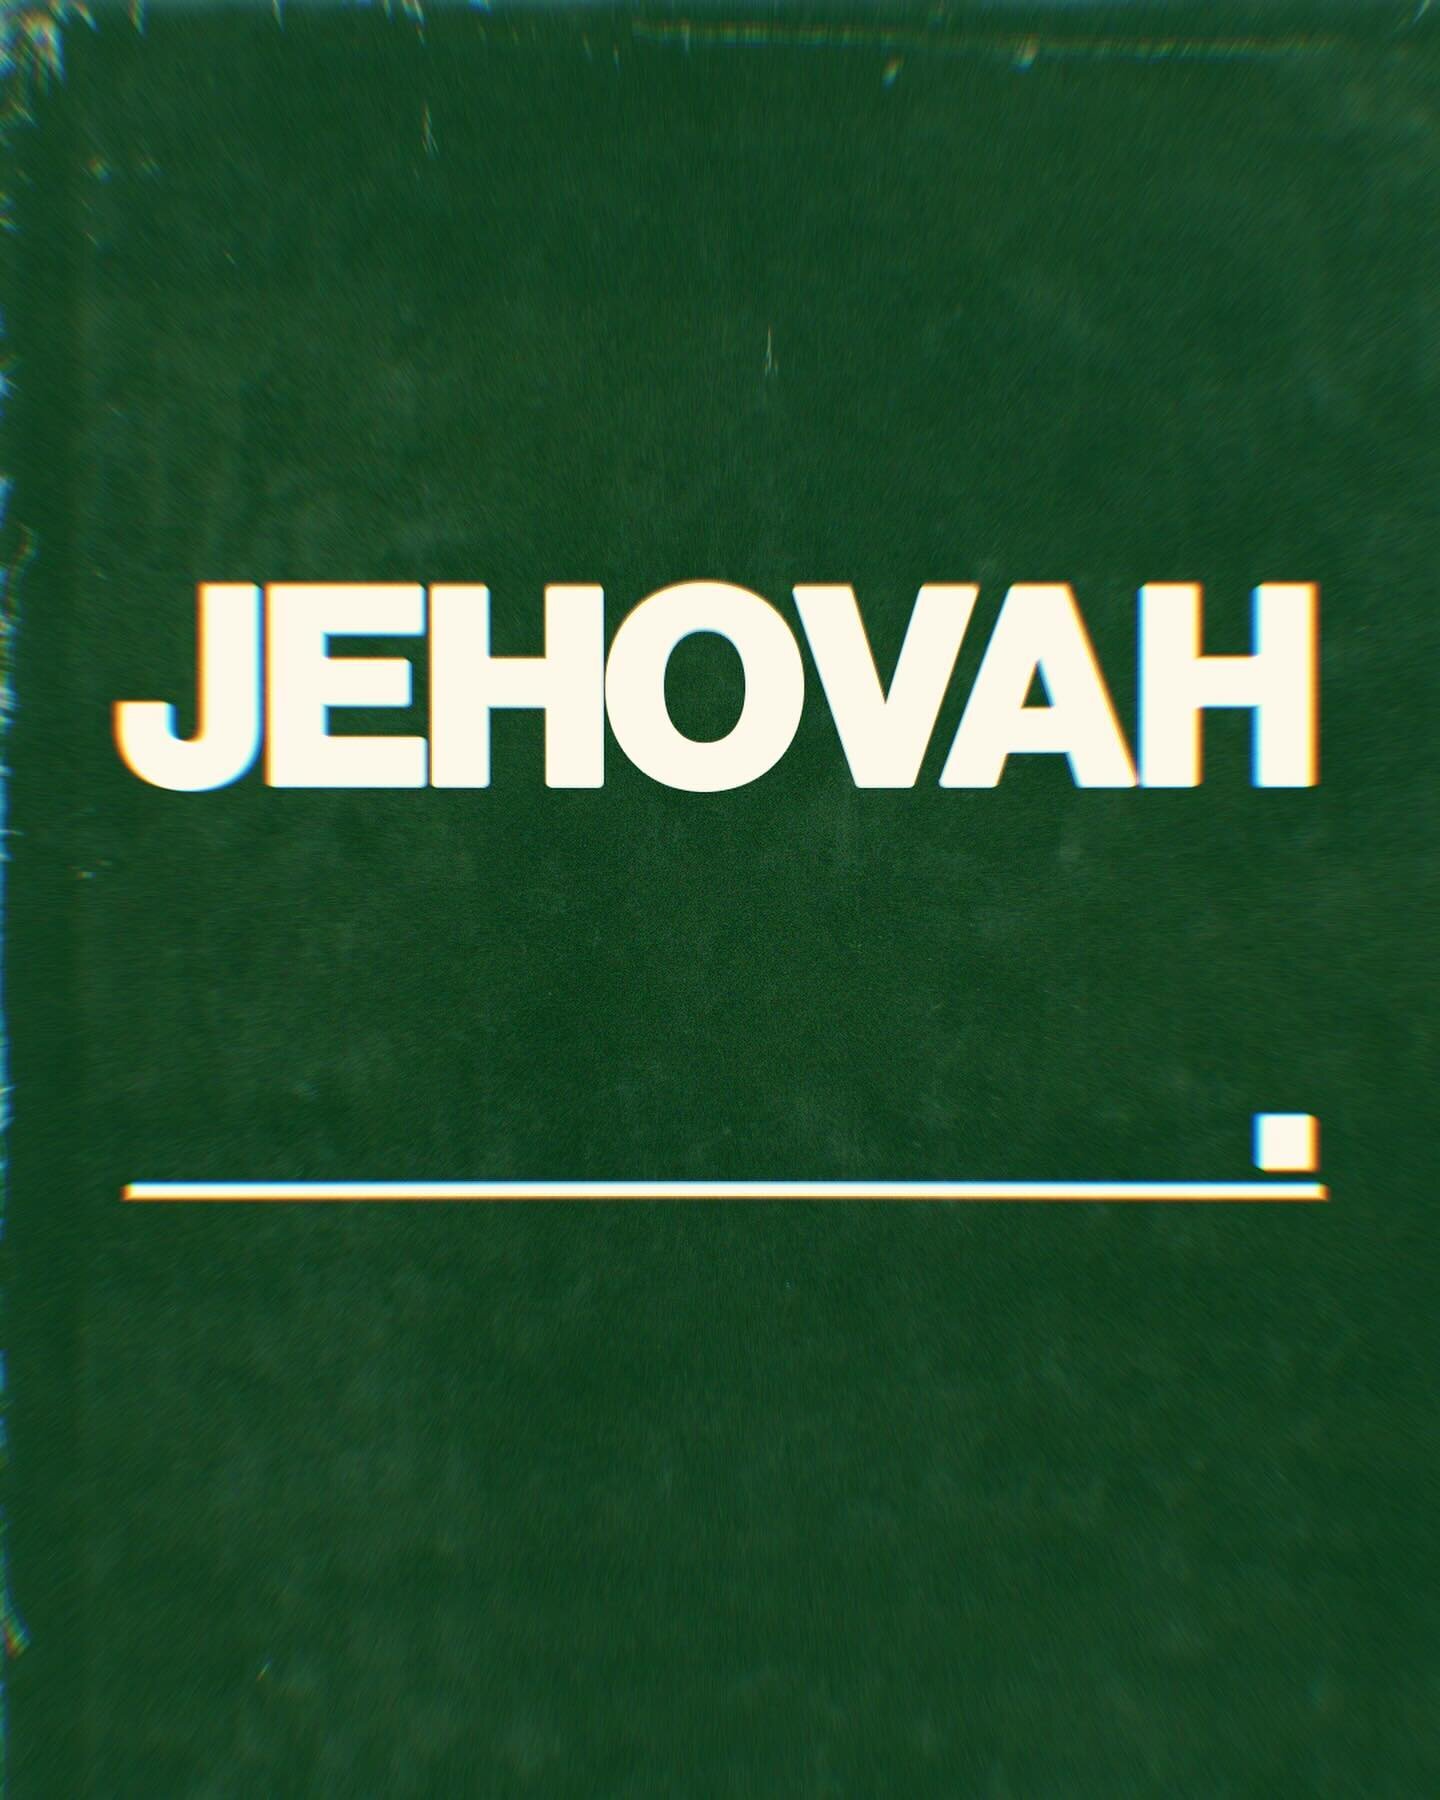 The Bible tells us Jehovah is:
1. Our Banner- &ldquo;Nissi&rdquo;
2. Our Provider- &ldquo;Jireh&rdquo;
3. Our Healer- &ldquo;Rapha&rdquo;
4. Our Peace- &ldquo;Shalom&rdquo;

&ldquo;Jehovah&rdquo;, design based off the song &ldquo;Jehovah&rdquo; by @e